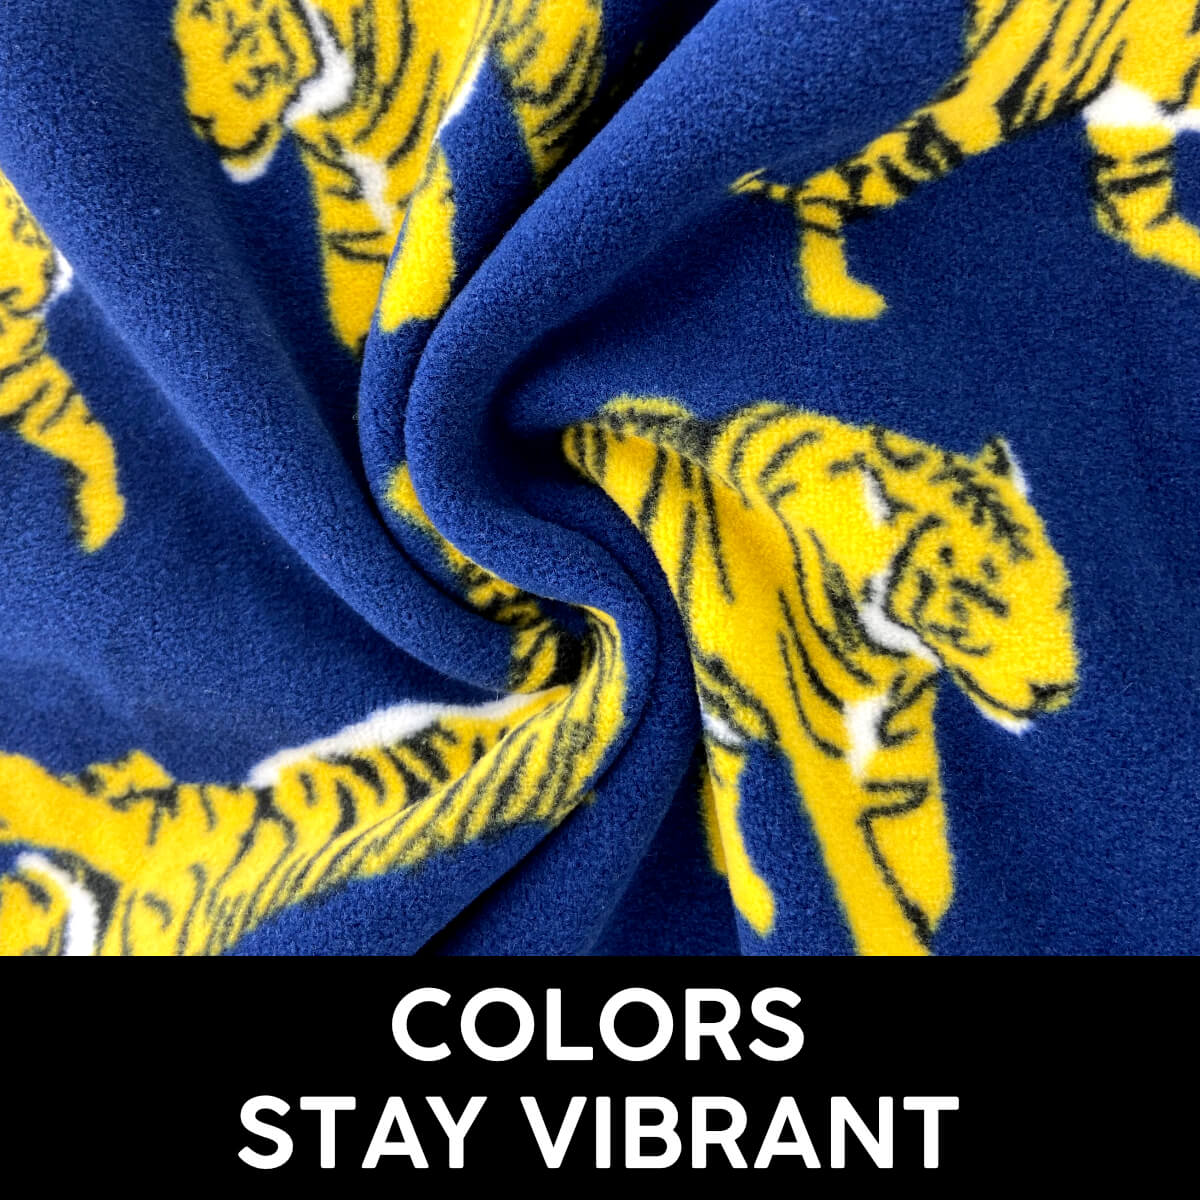 Bright Bold and Beautiful Winter Essential Sleep Pants for Men in Fleece. A must have for cold Winter Days. Shop Men's long sleep pj pajama pants here today!